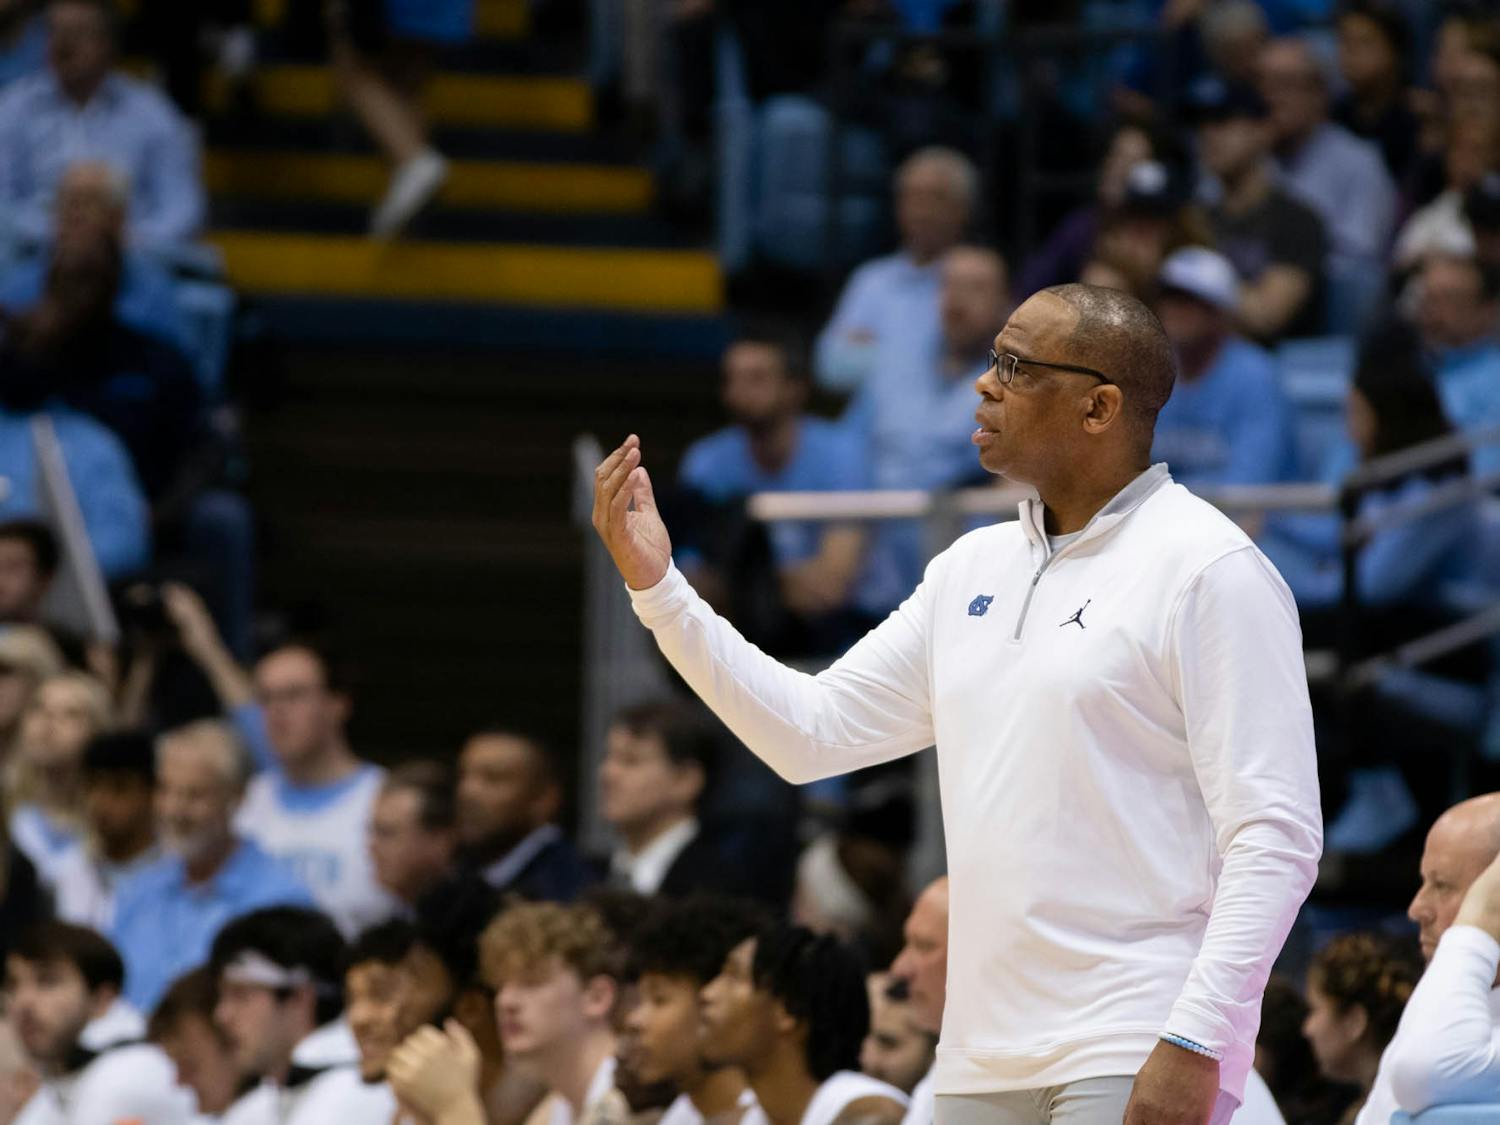 UNC head coach Hubert Davis coaches from the sideline during the men's basketball game on Sunday, Nov. 20, 2022, at the Dean Smith Center. UNC beat JMU 80-64.